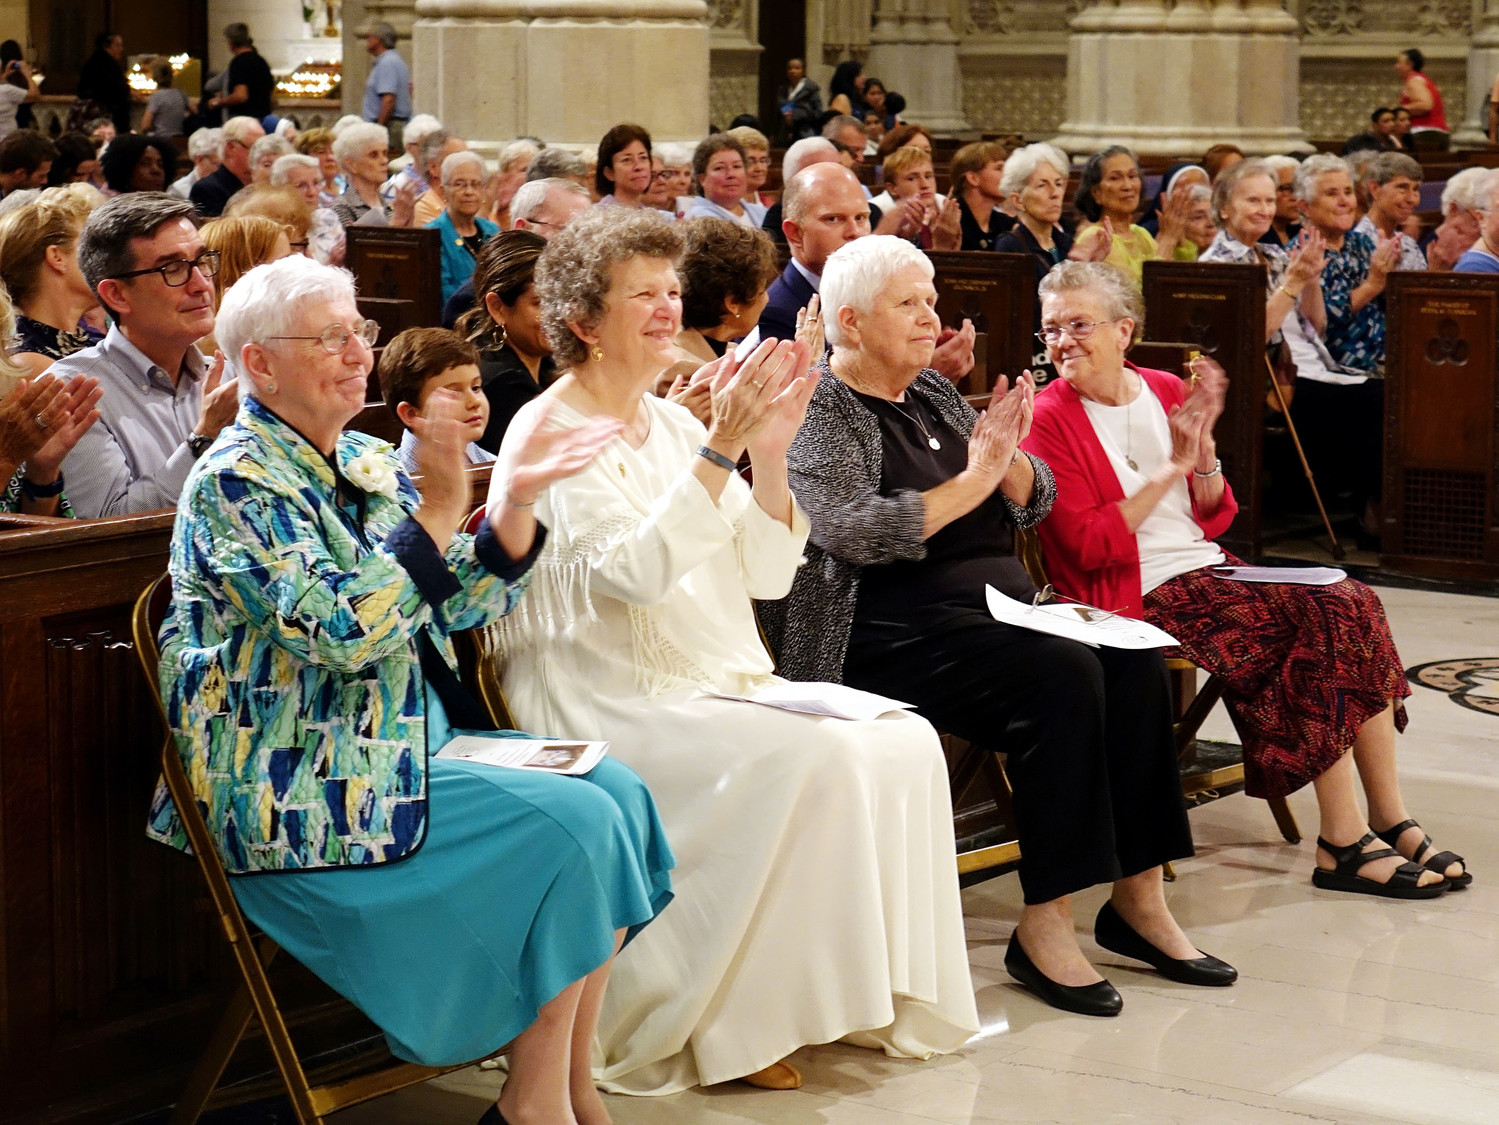 Several Sisters of Charity of New York applaud. The new Shrine of St. Elizabeth Ann Seton is the beneficiary of community support under the leadership of Sister Jane Iannucelli, S.C., president of the Sisters of Charity of New York.